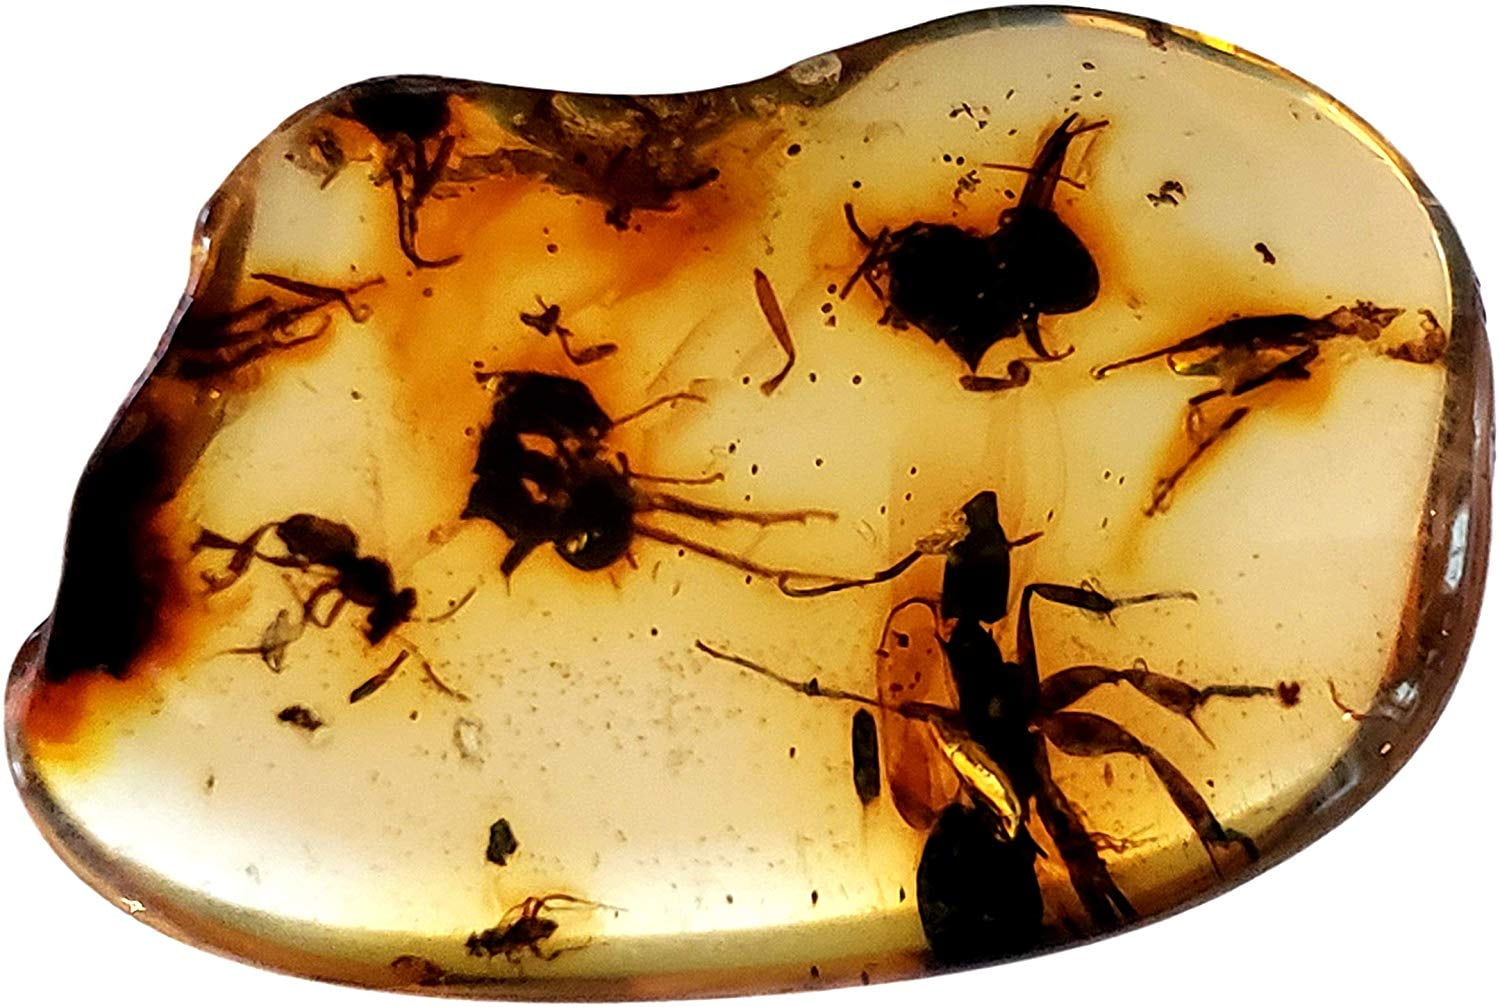 Baltic amber Amber gift | Insect fossil in amber Amber inclusion Inclusion fossil